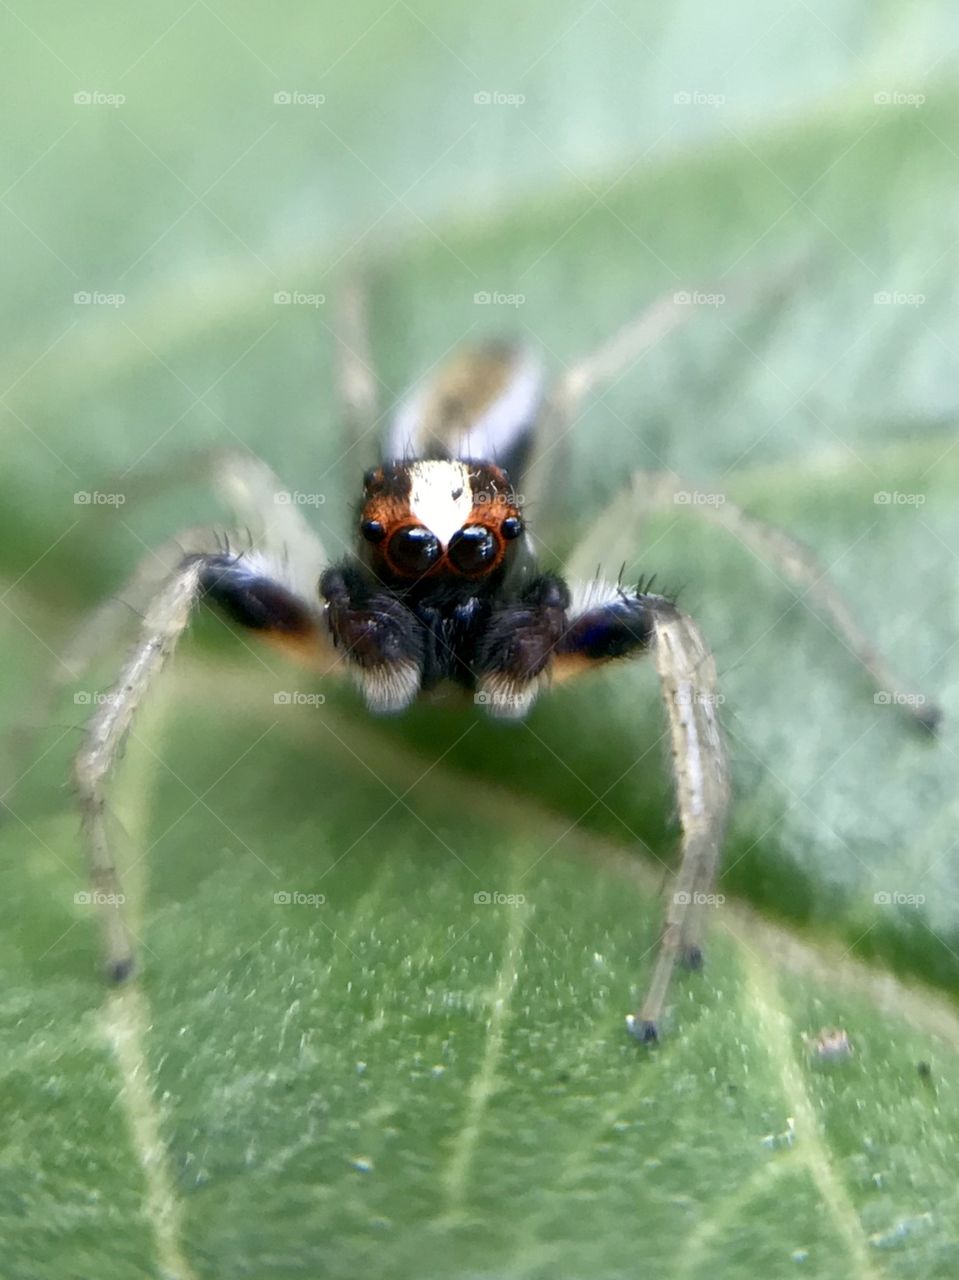 Beautiful spider | Photo with iPhone 7 + Macro lens.